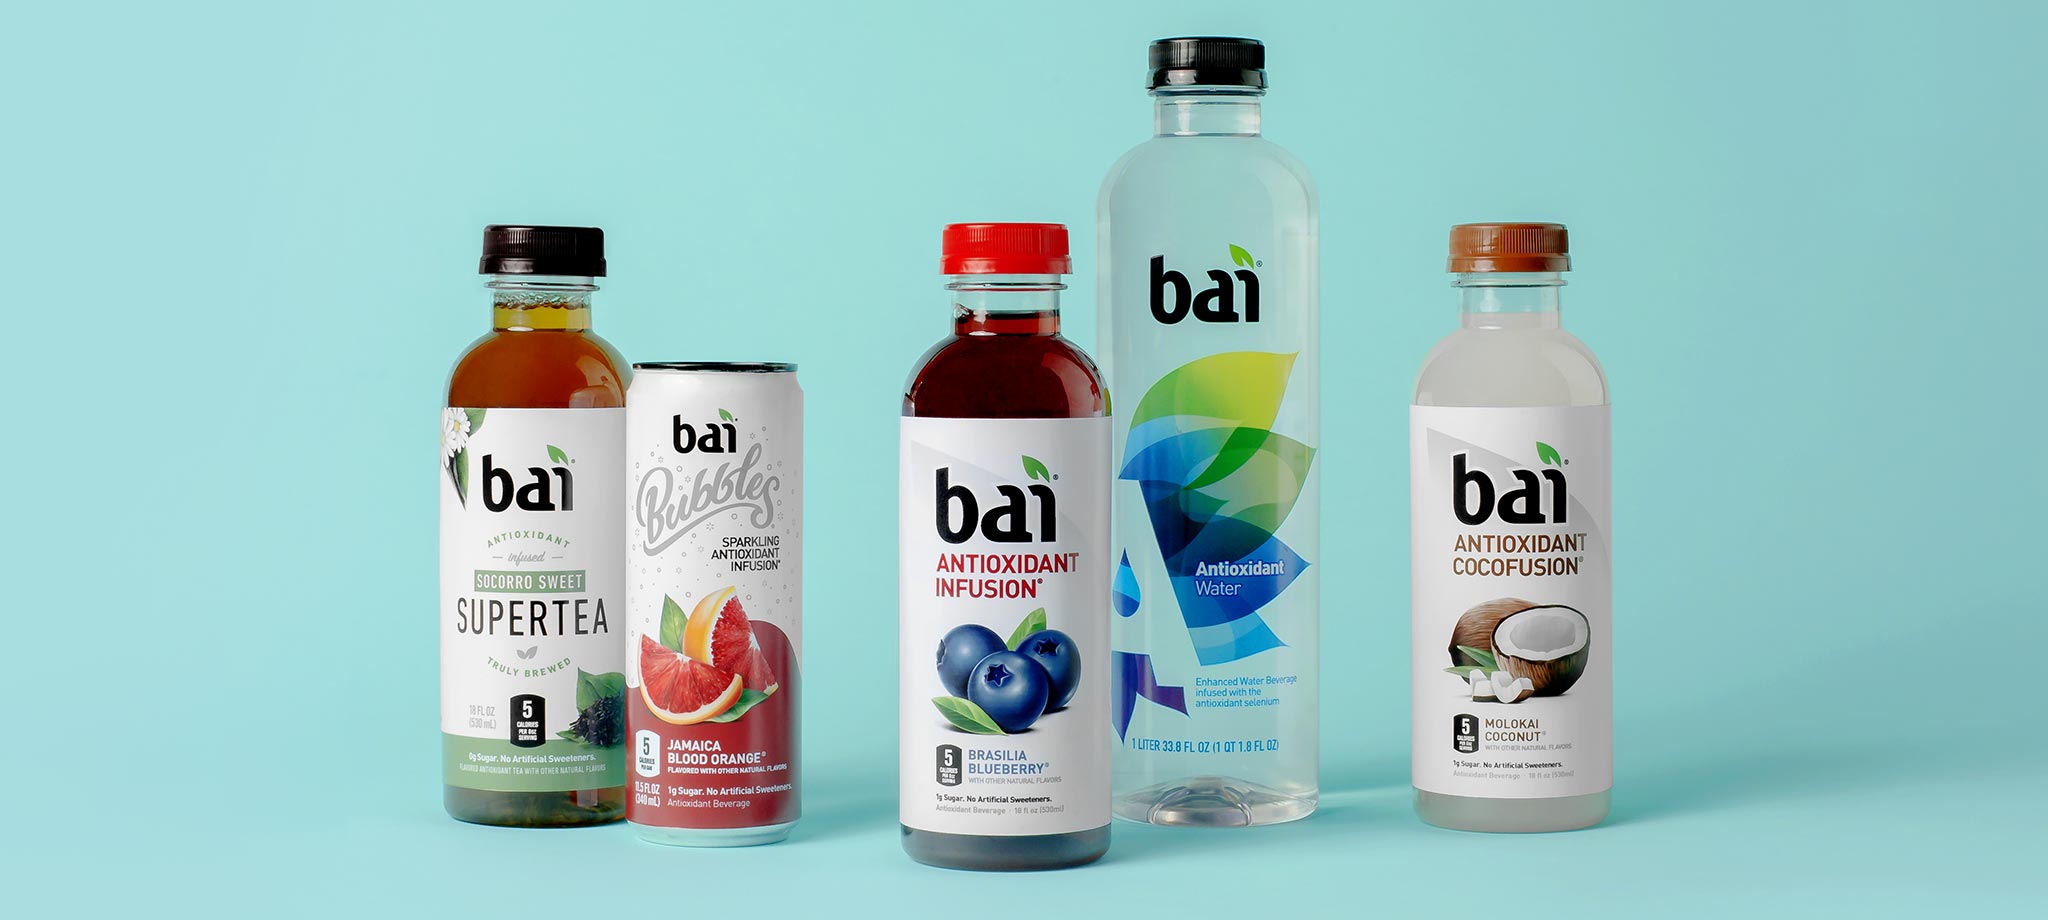 Our Products - Bai Low-Calorie Antioxidant Drinks2048 x 920